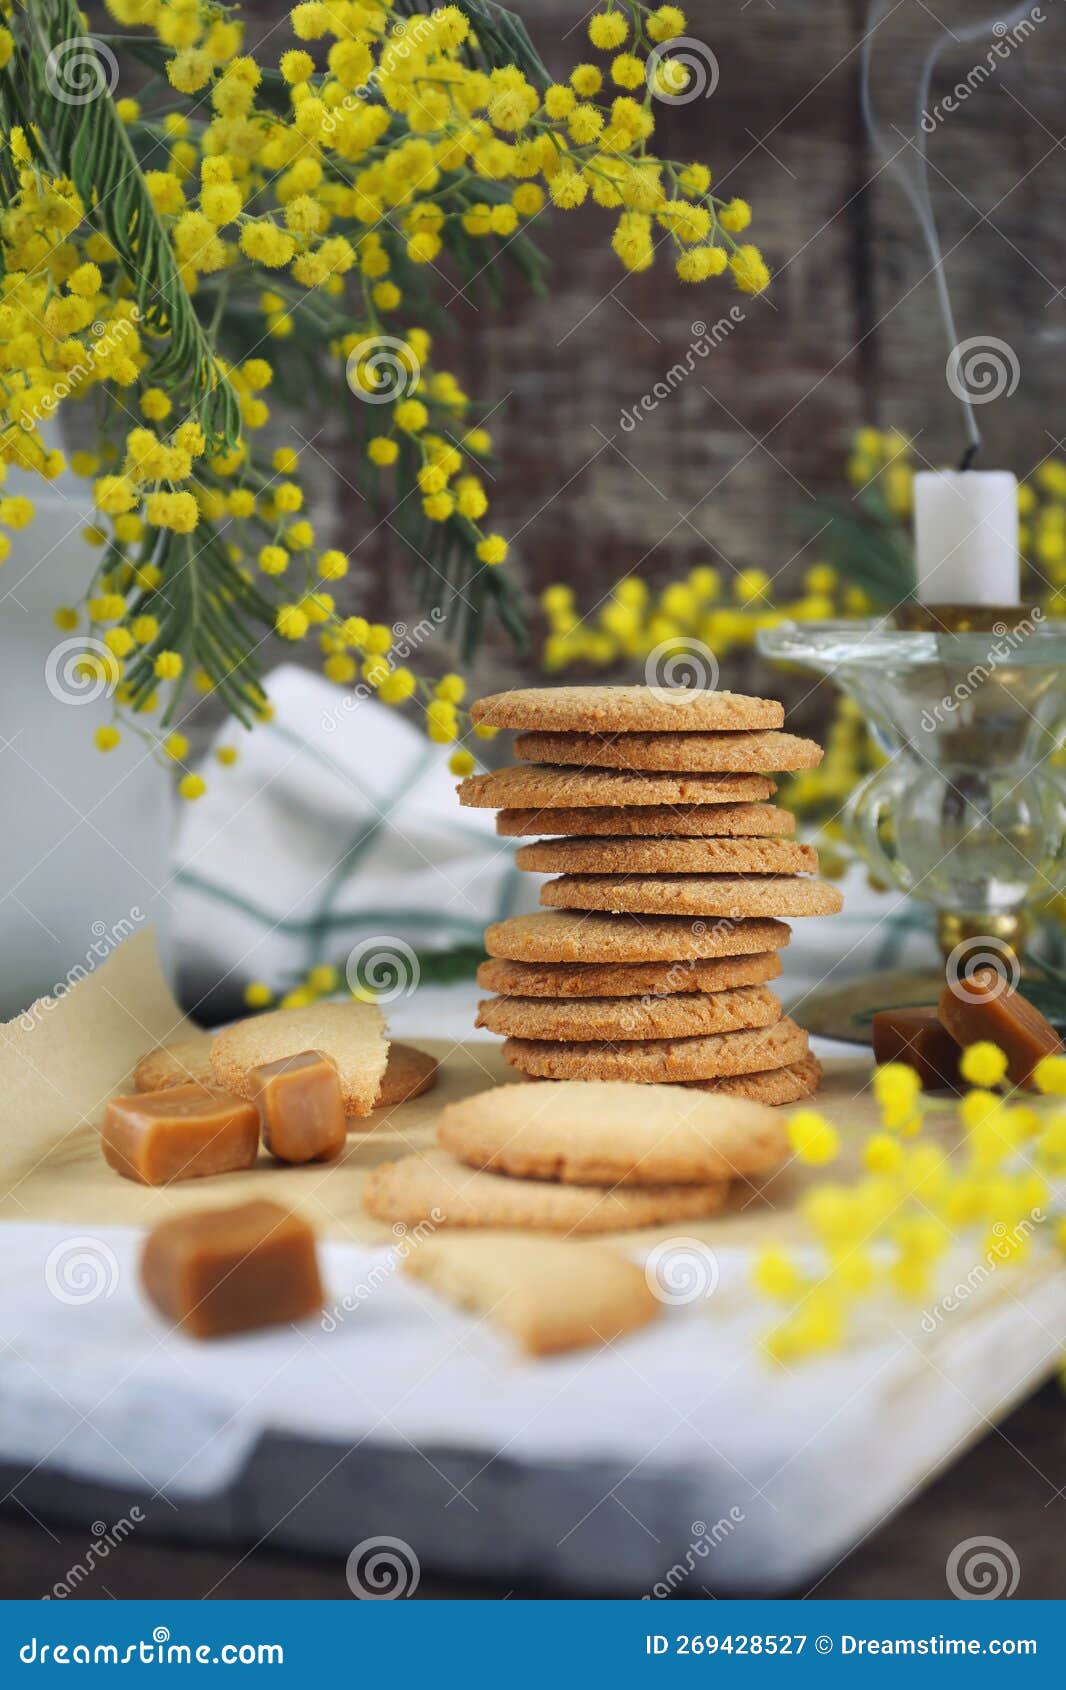 palets bretons, french cookies. salted caramel shortbread breton cookies and bouquet of mimosa